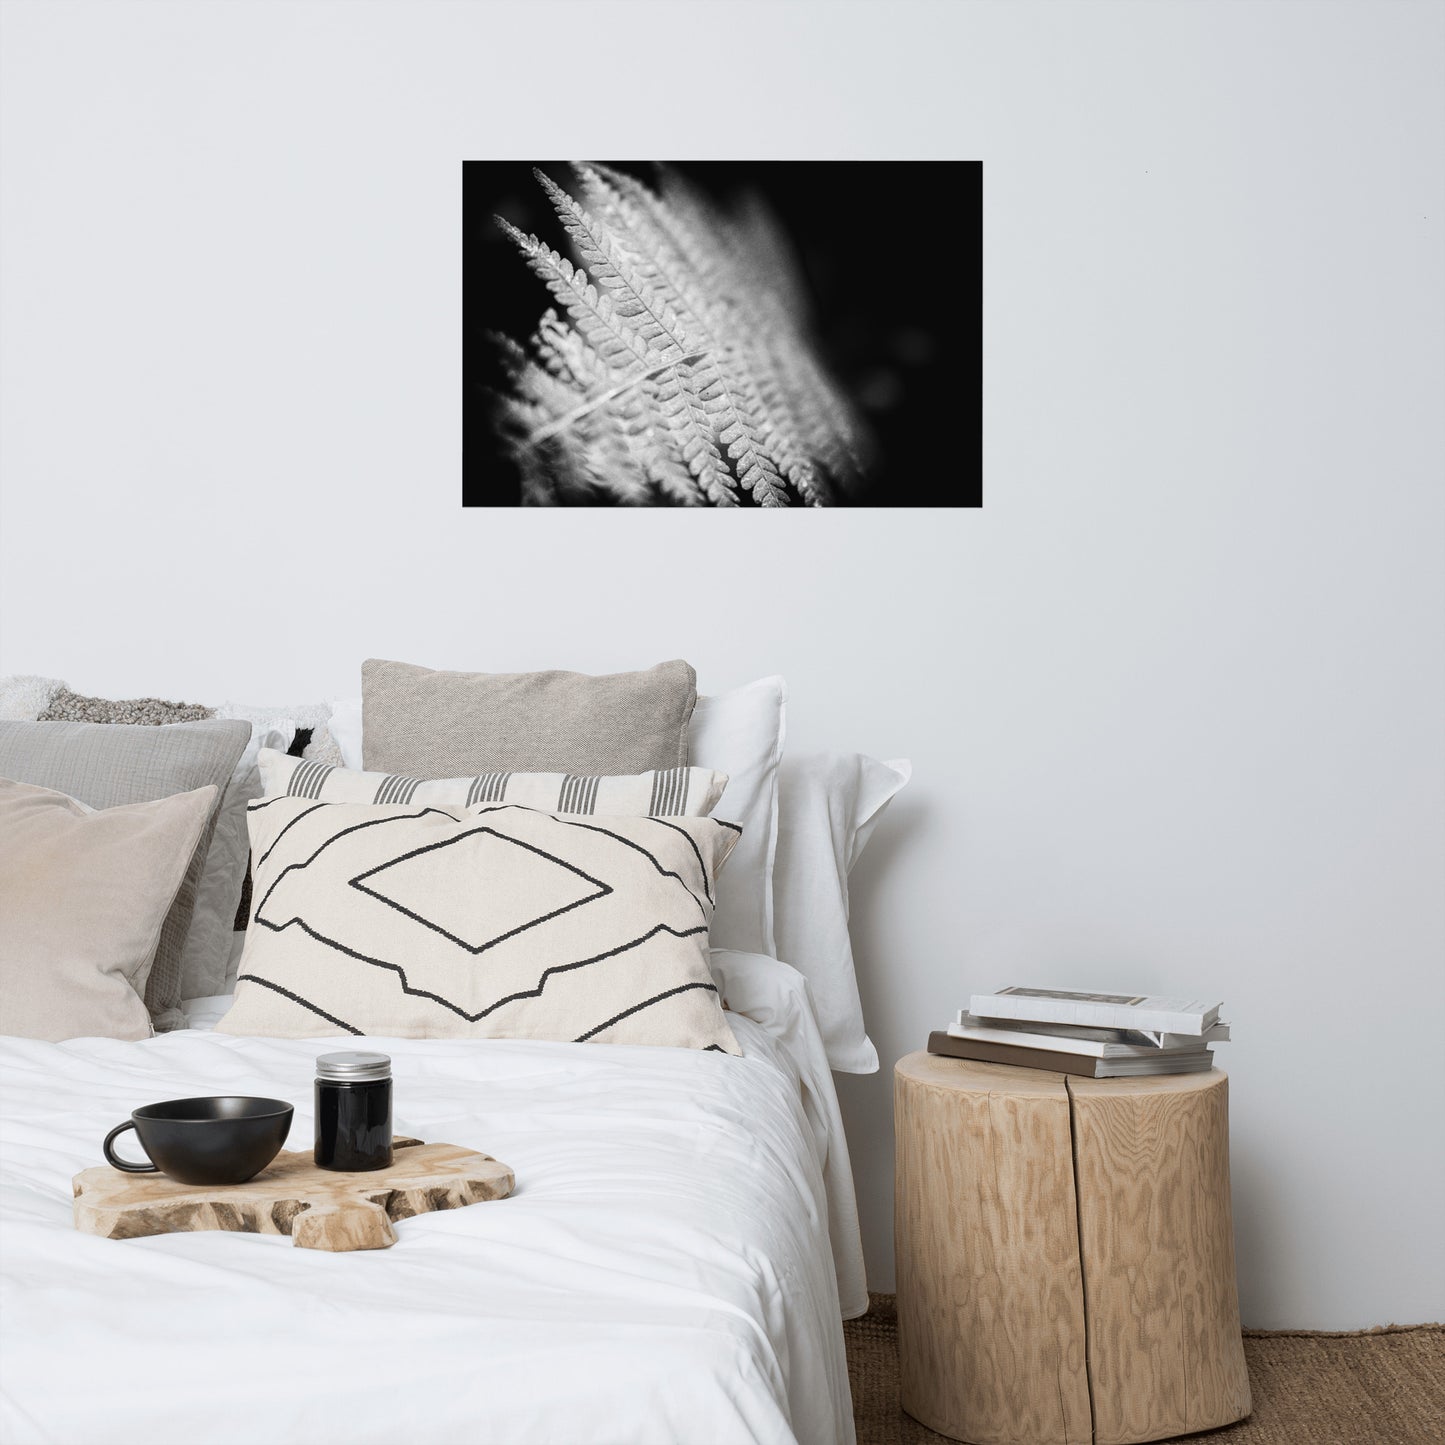 Fern Leaf In the Sunlight Black and White Botanical Nature Photo Loose Unframed Wall Art Prints